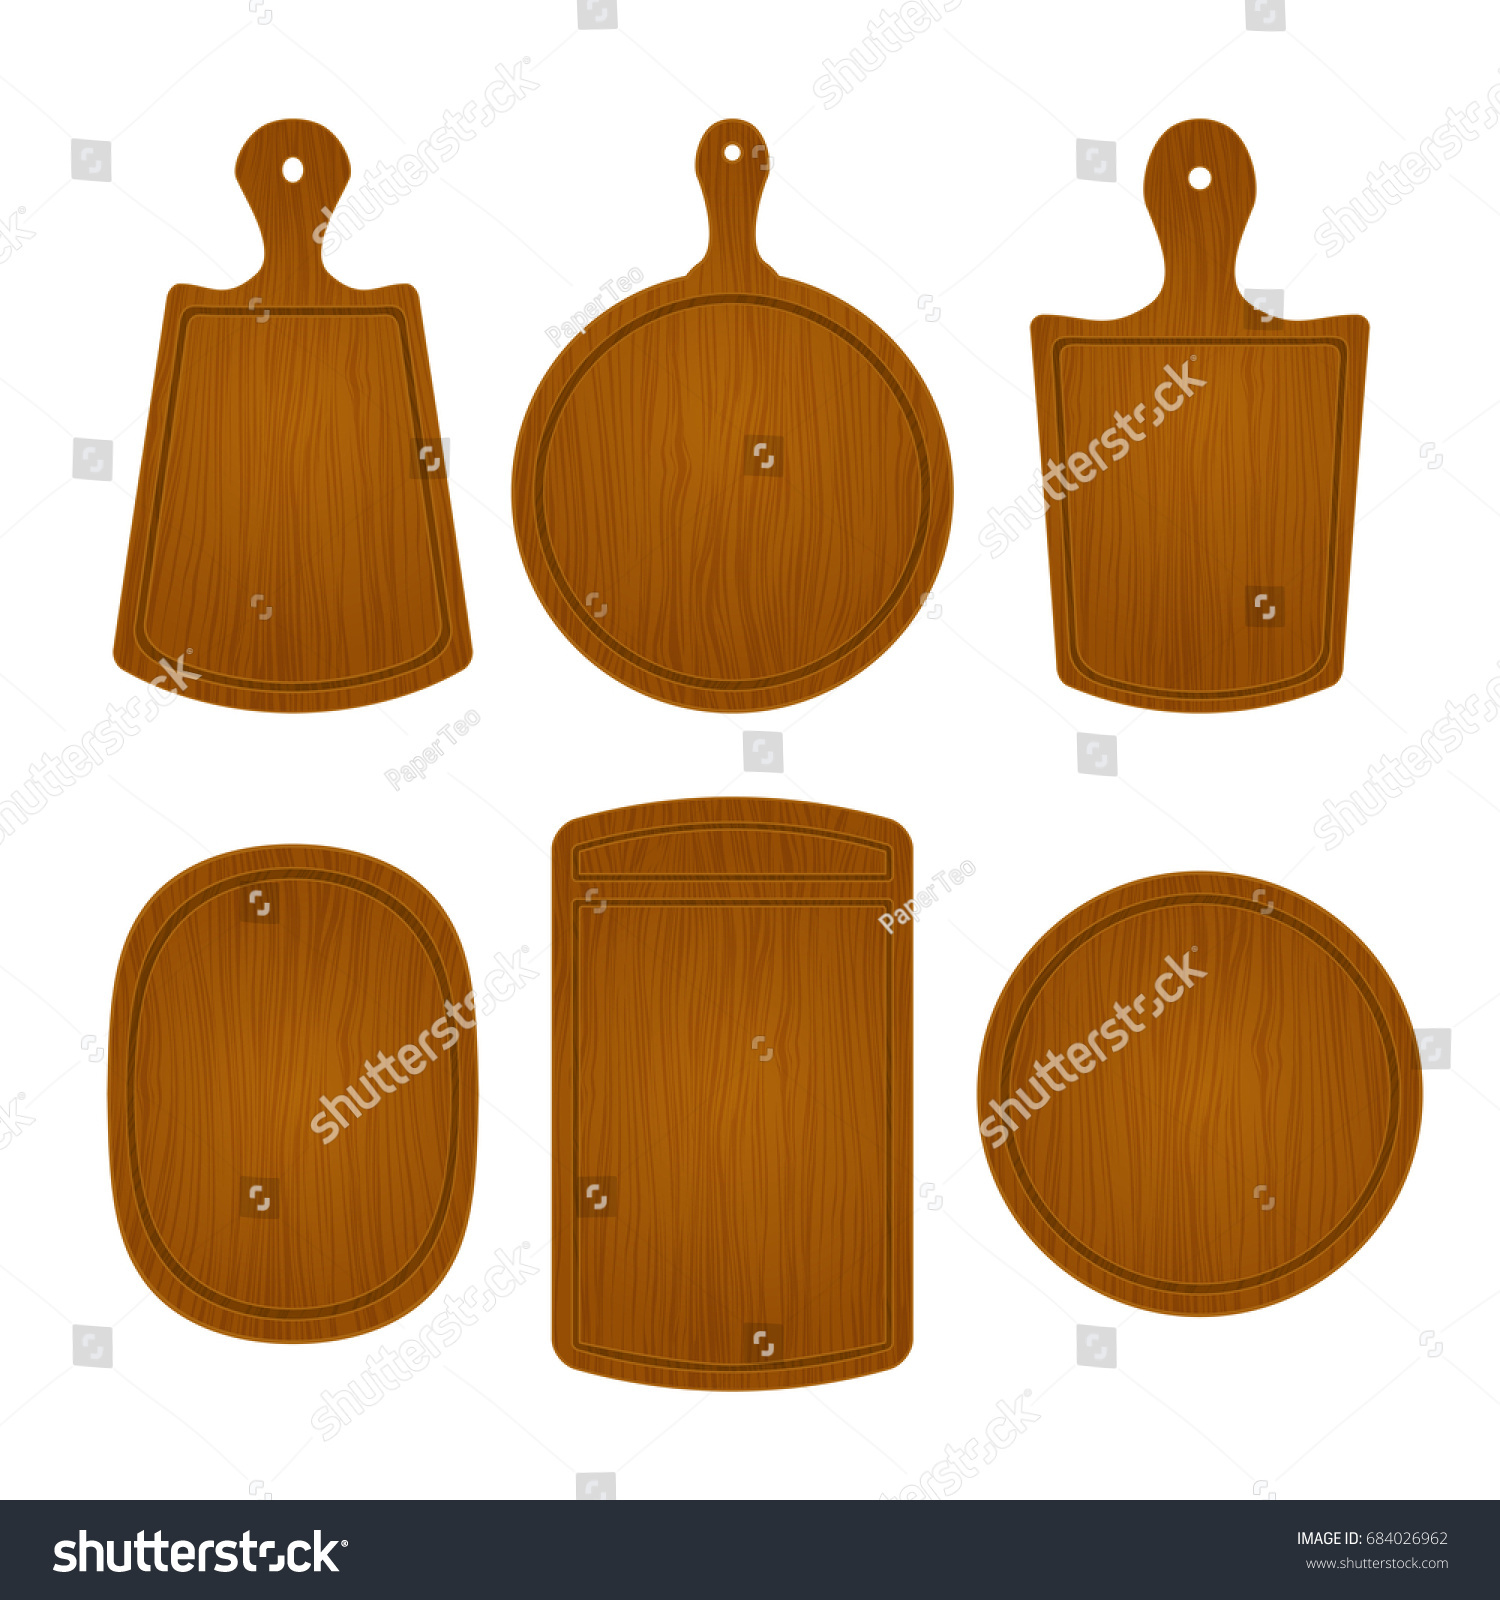 SVG of Set of empty wooden cutting boards in different shapes isolated on white background. Vector illustration of kitchen object. Template for menu, cafe or restaurant svg